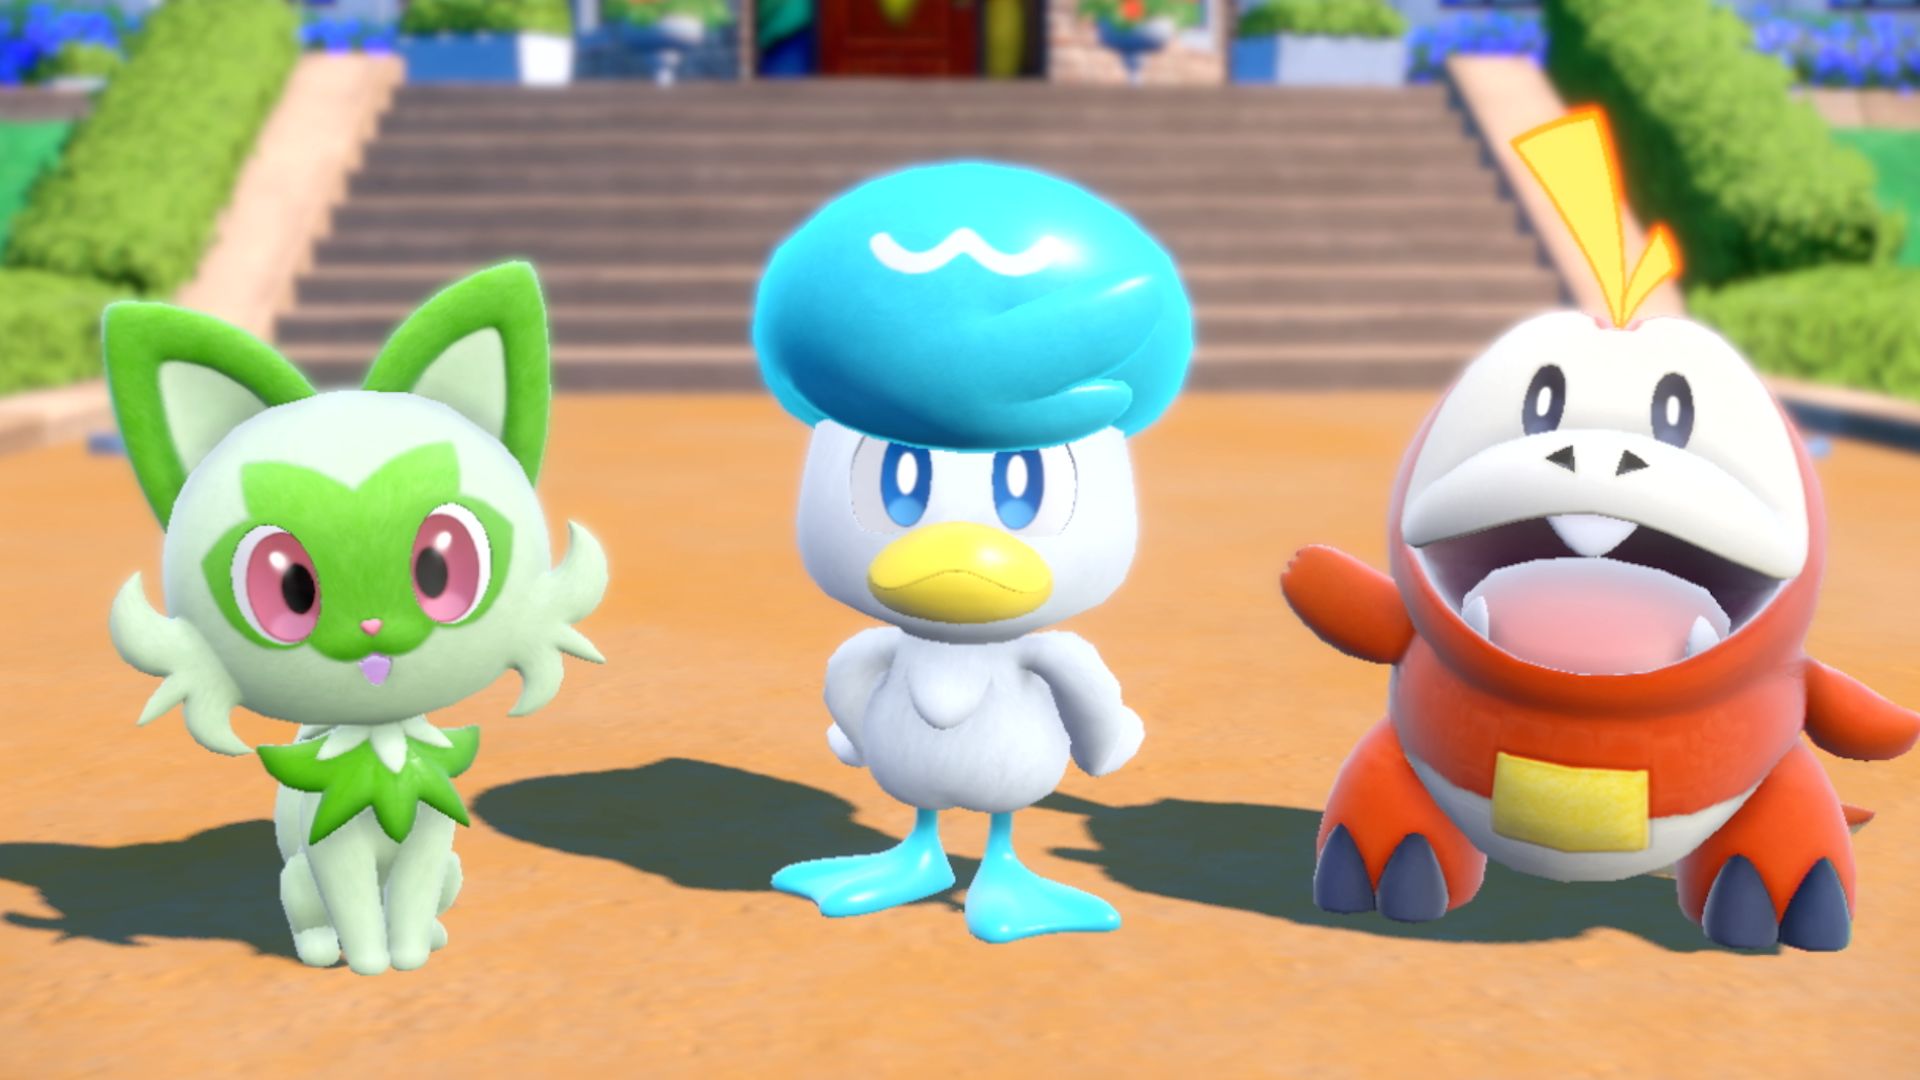 What to Expect From Pokemon Scarlet and Violet's DLC Based on Gen 8's